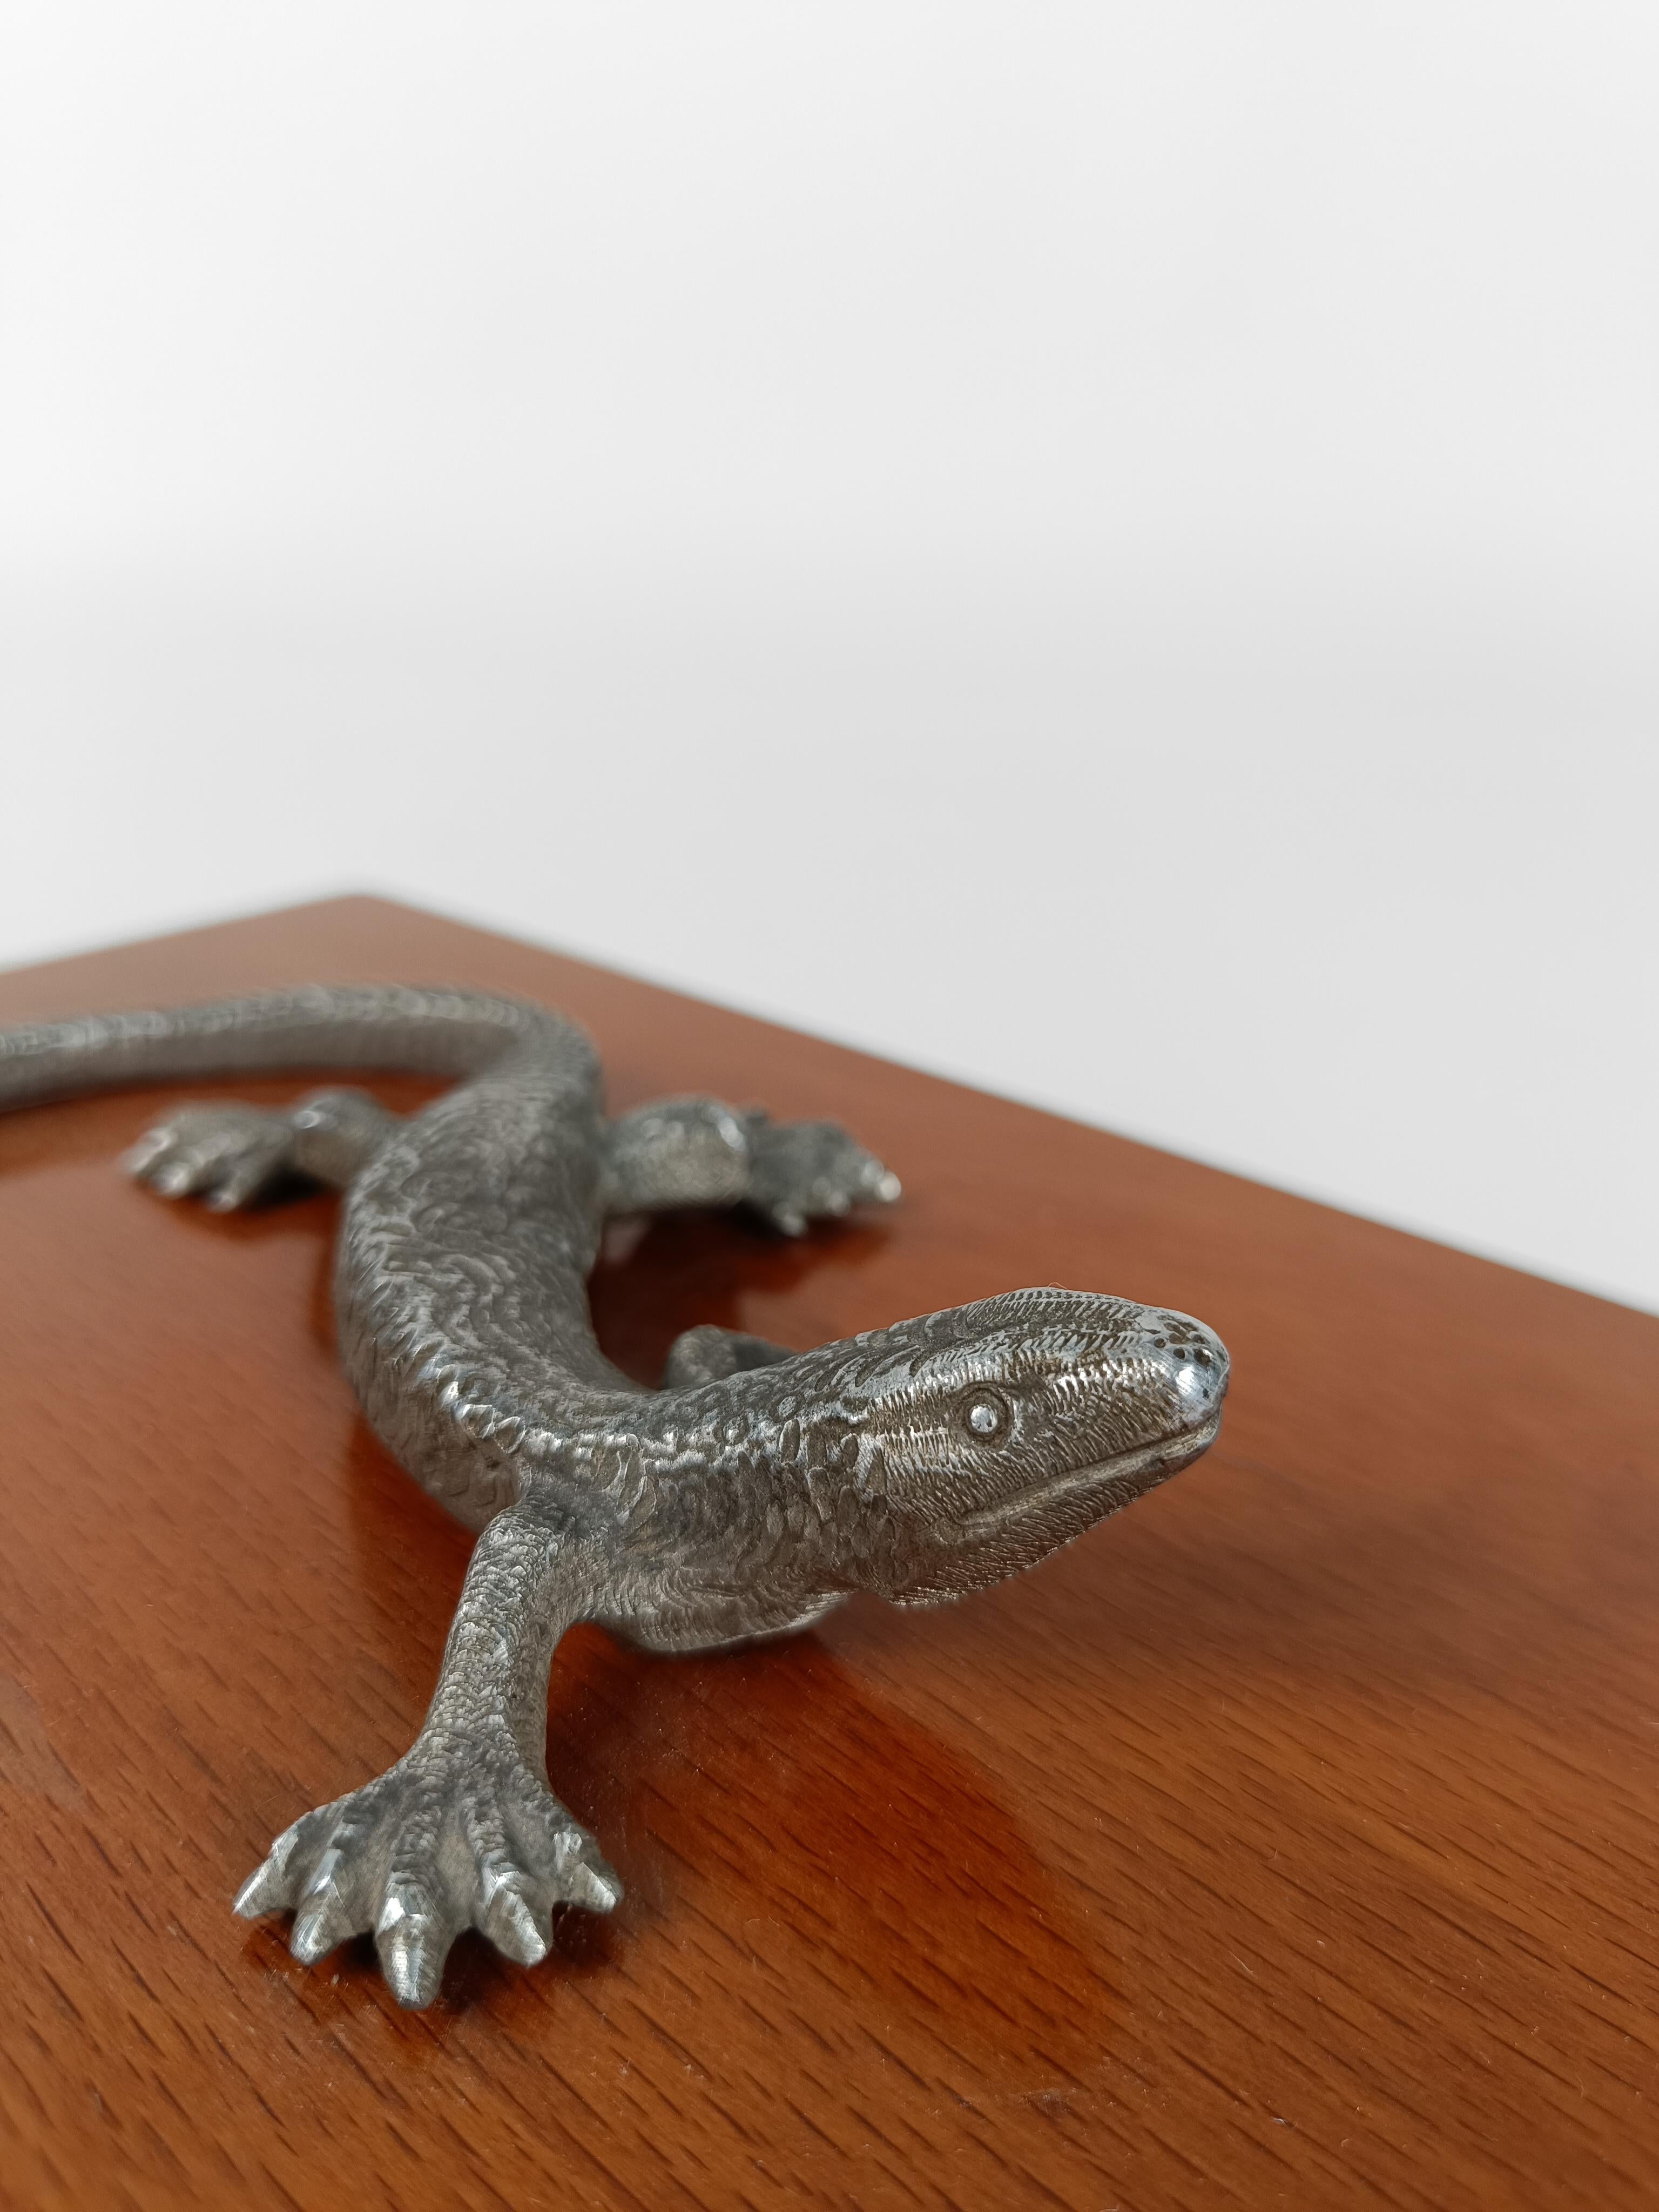 Art Deco wooden Box decorated with a Silver Tone Metal Lizard-shaped Handle For Sale 2